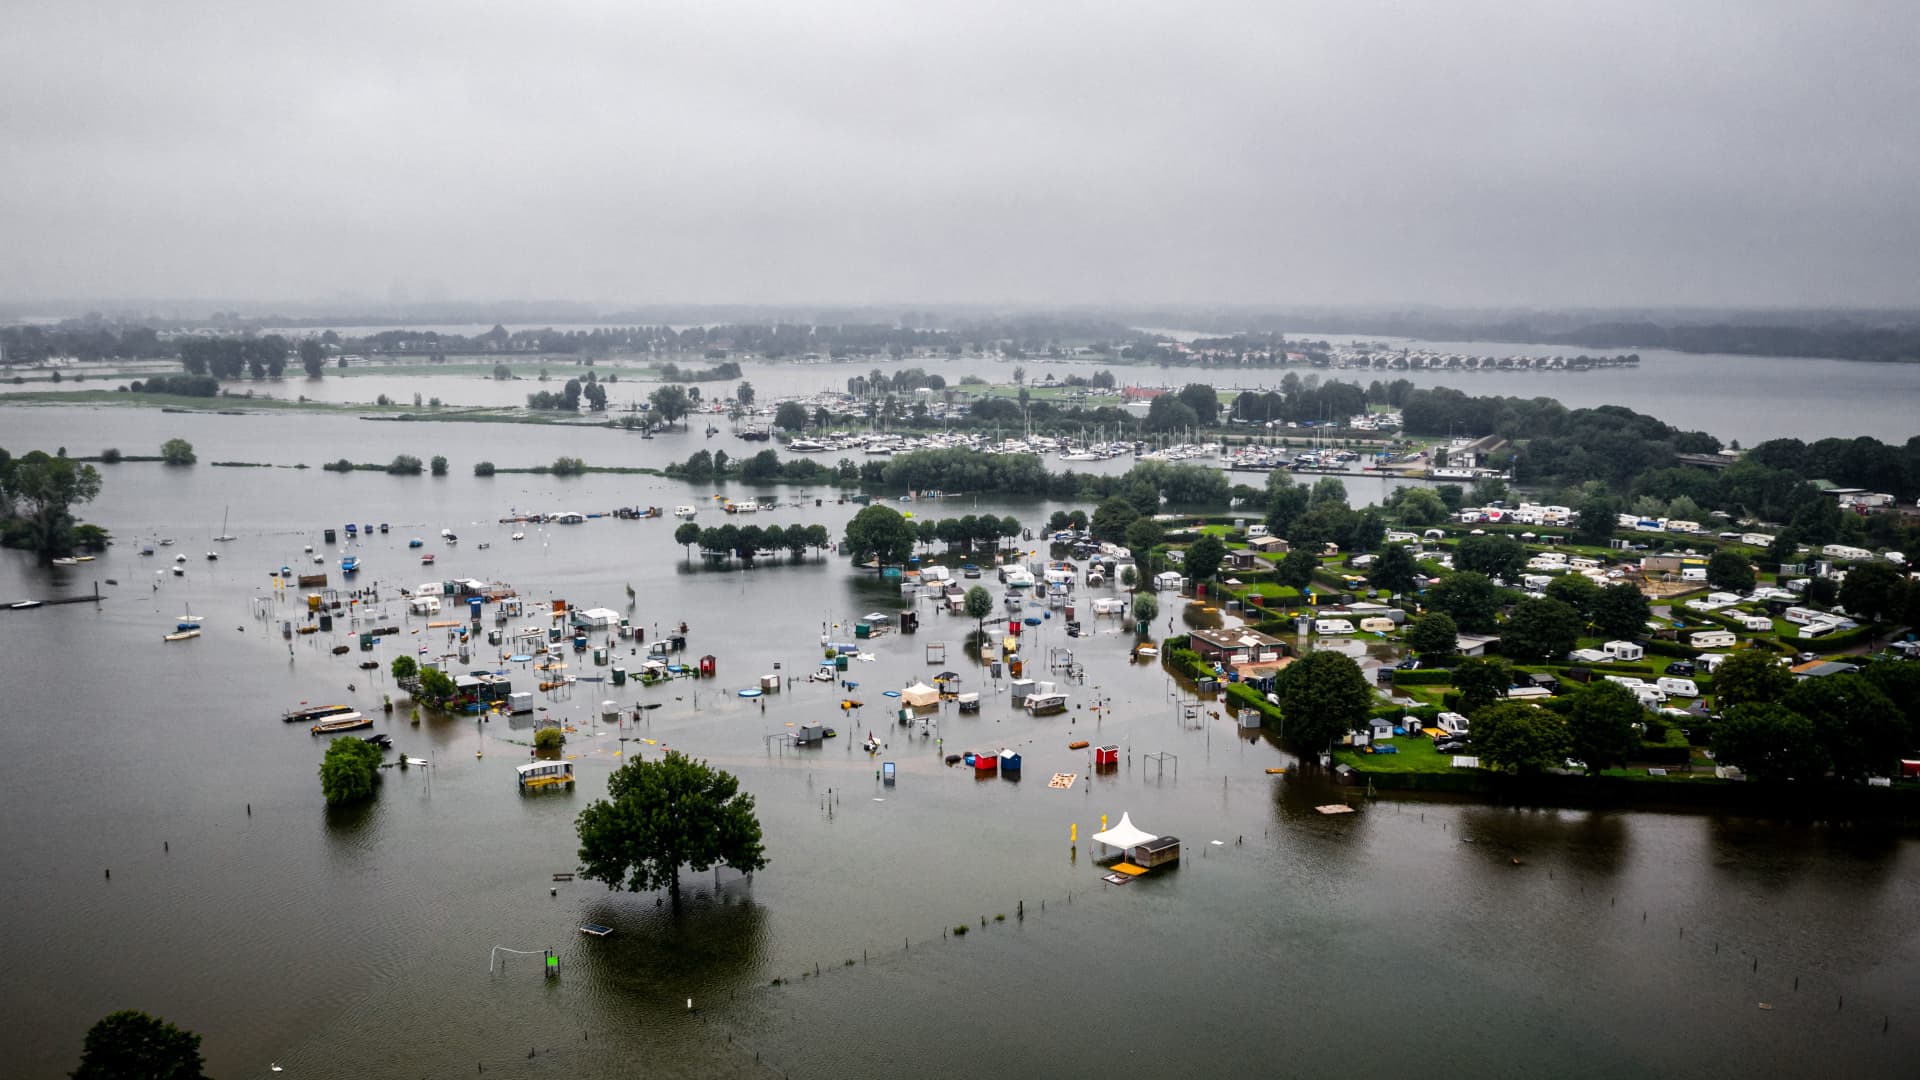 This aerial photograph shows partially submerged caravans and campers in flood waters at the camping site of De Hatenboer in Roermond on July 15, 2021.